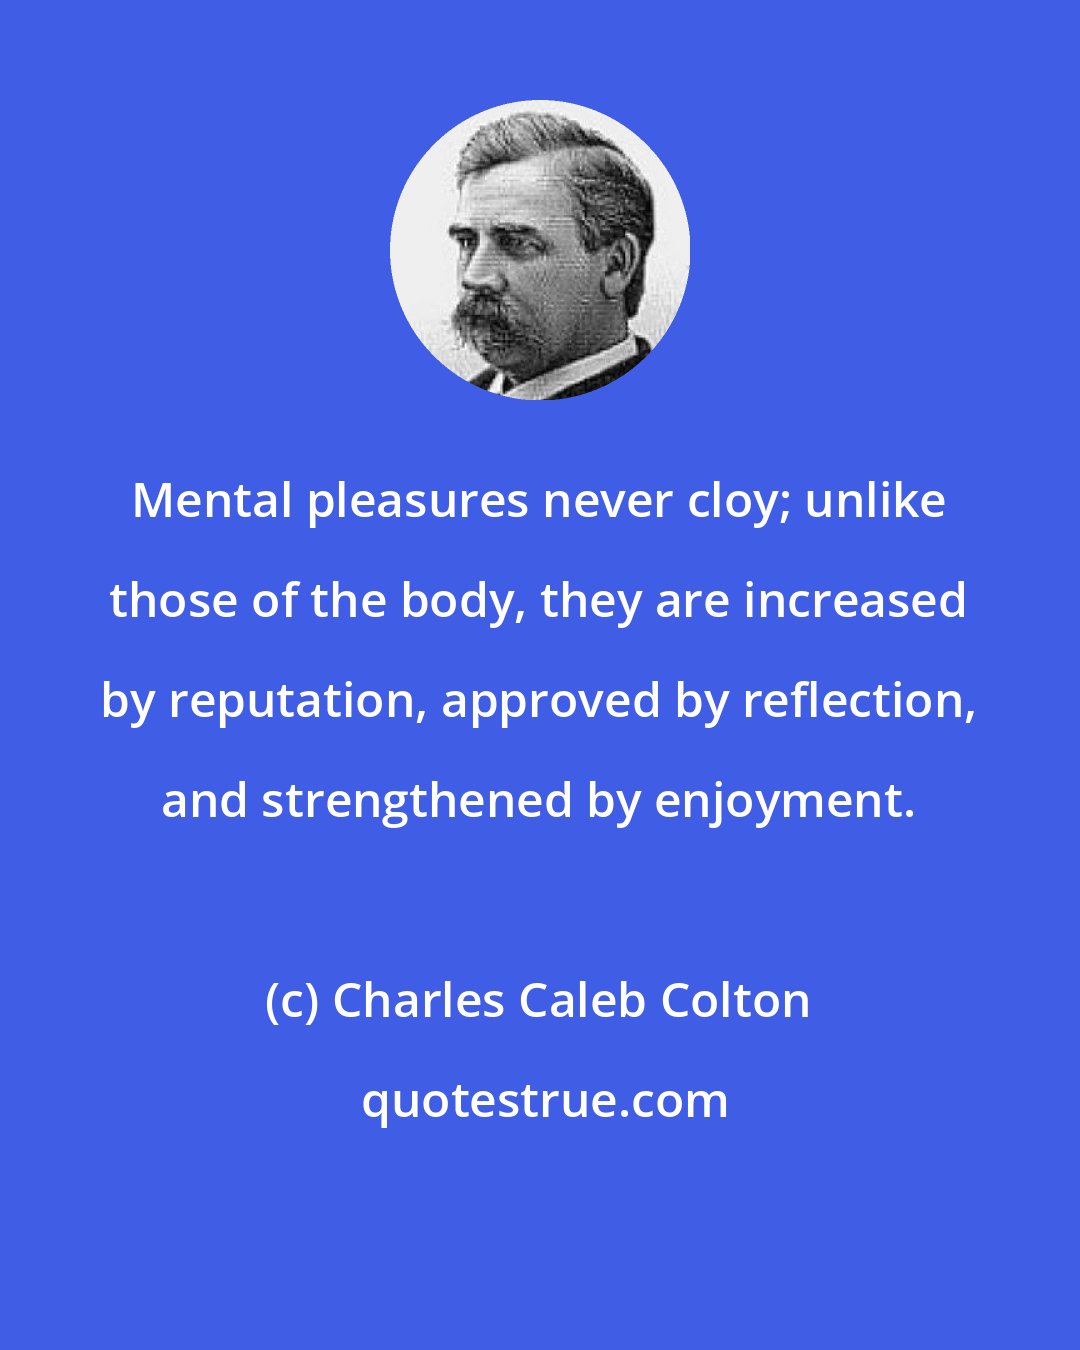 Charles Caleb Colton: Mental pleasures never cloy; unlike those of the body, they are increased by reputation, approved by reflection, and strengthened by enjoyment.